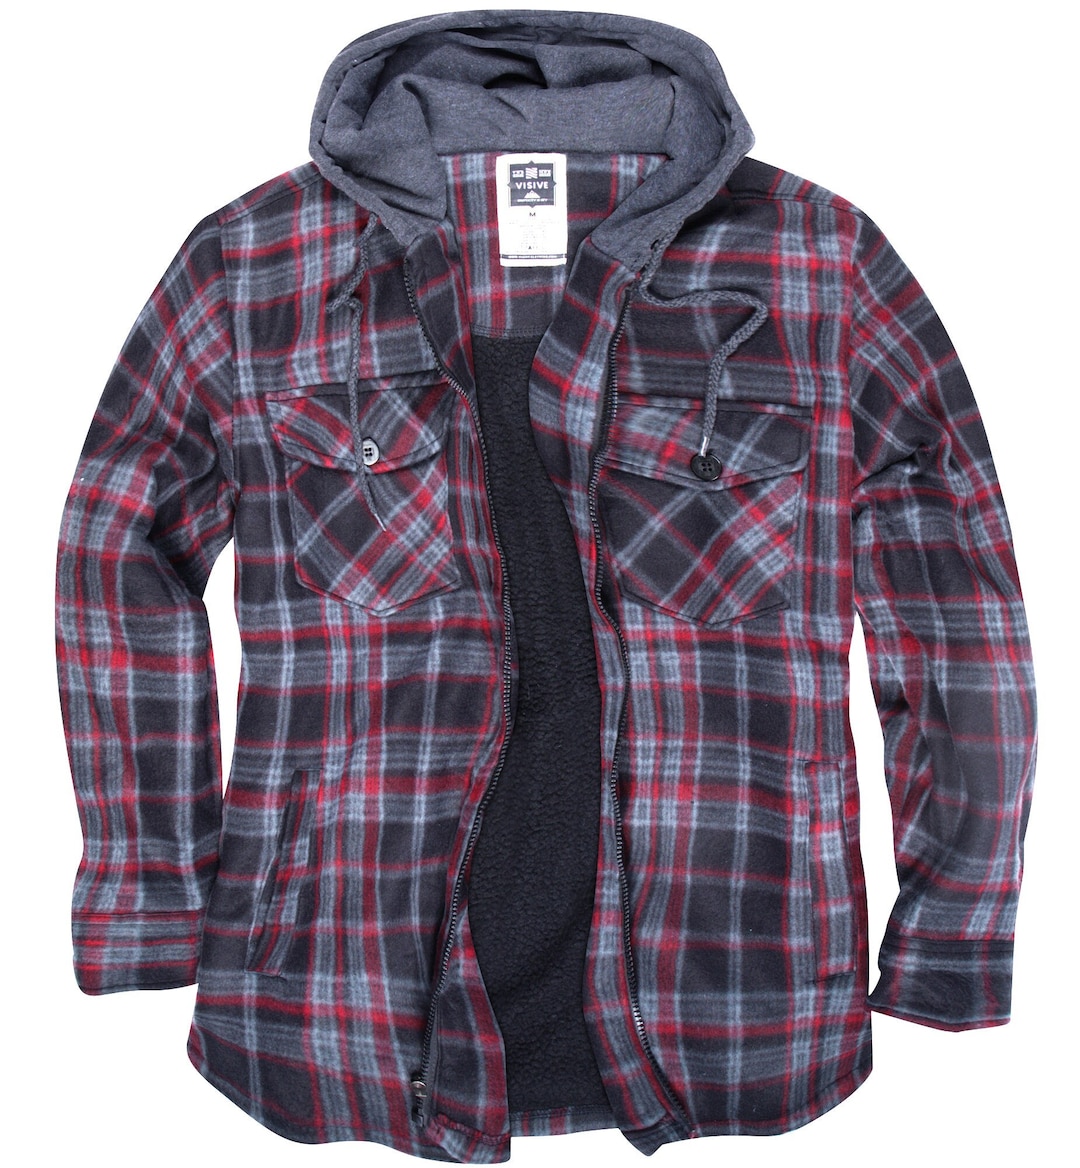 Visive Mens Heavy Flannel Shirt Jacket for Mens Big and Tall Zip up ...